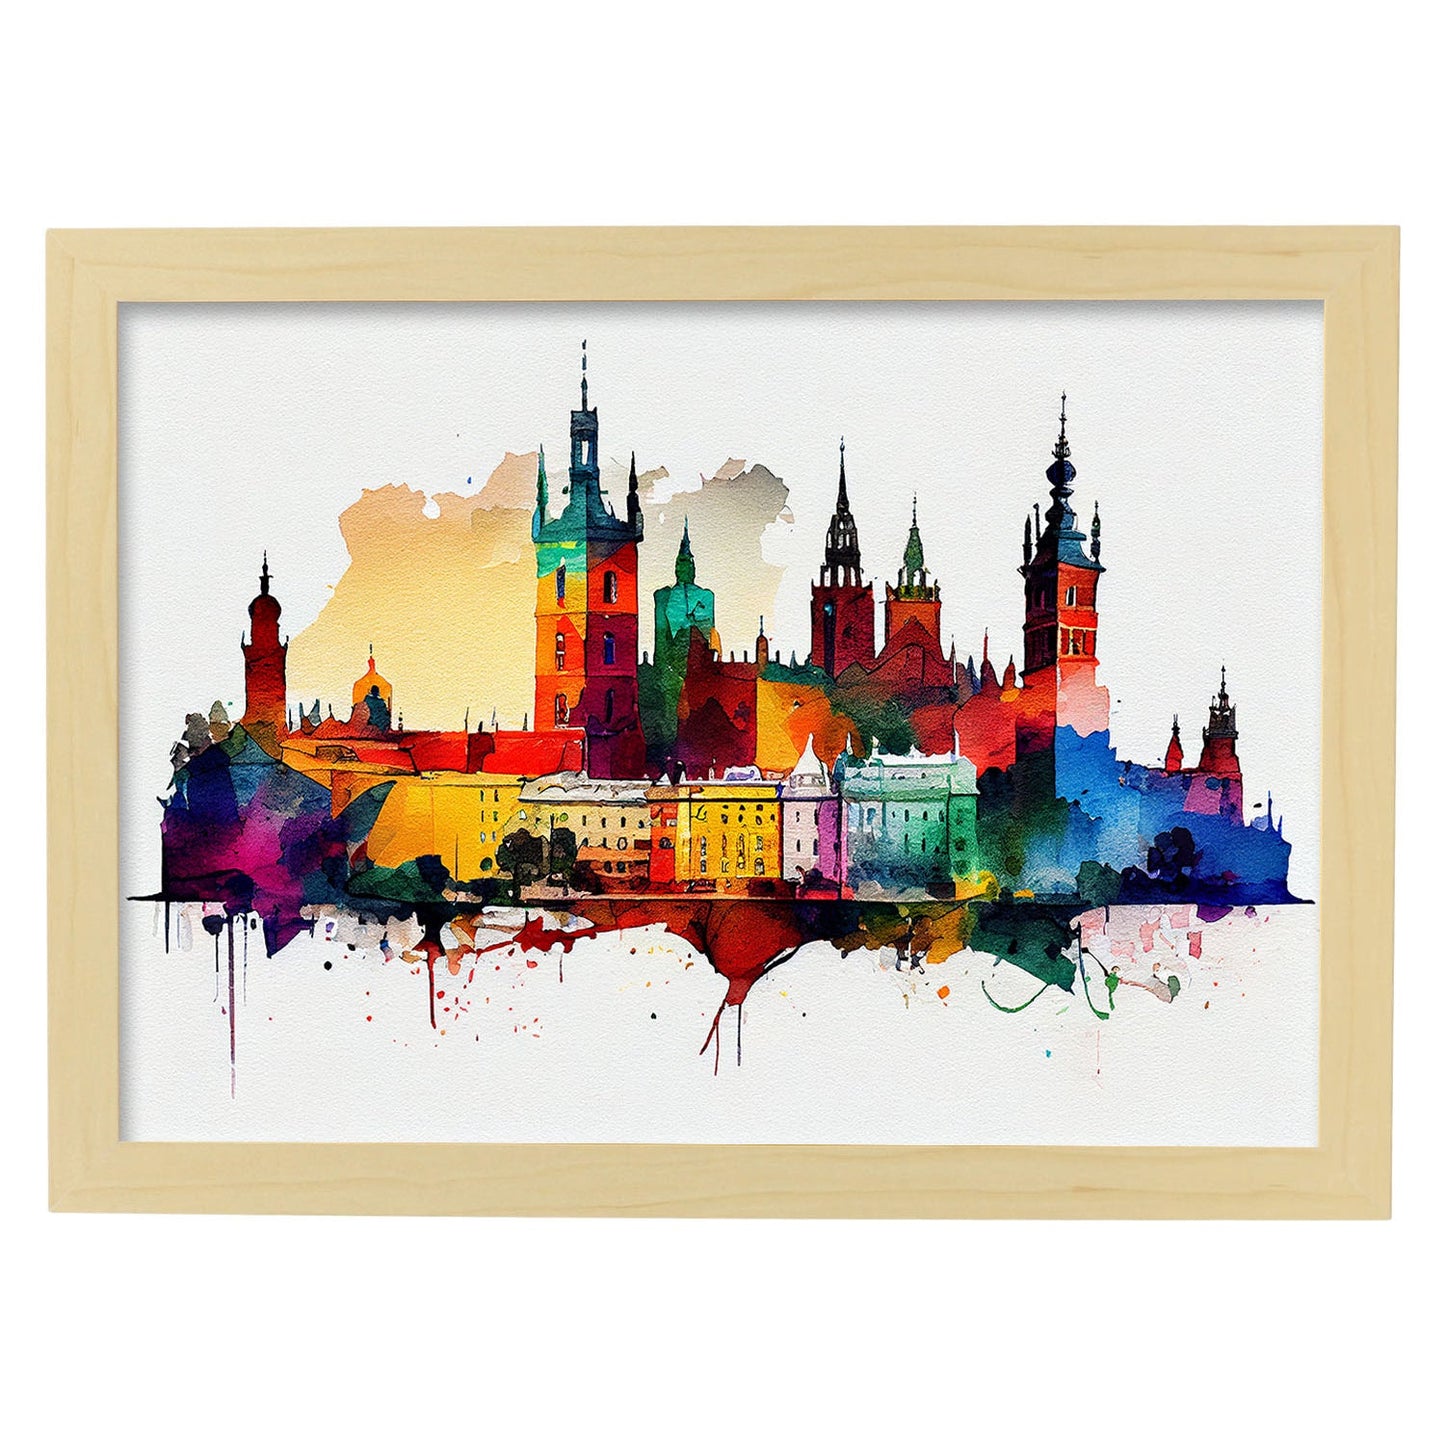 Nacnic watercolor of a skyline of the city of Krakow_2. Aesthetic Wall Art Prints for Bedroom or Living Room Design.-Artwork-Nacnic-A4-Marco Madera Clara-Nacnic Estudio SL